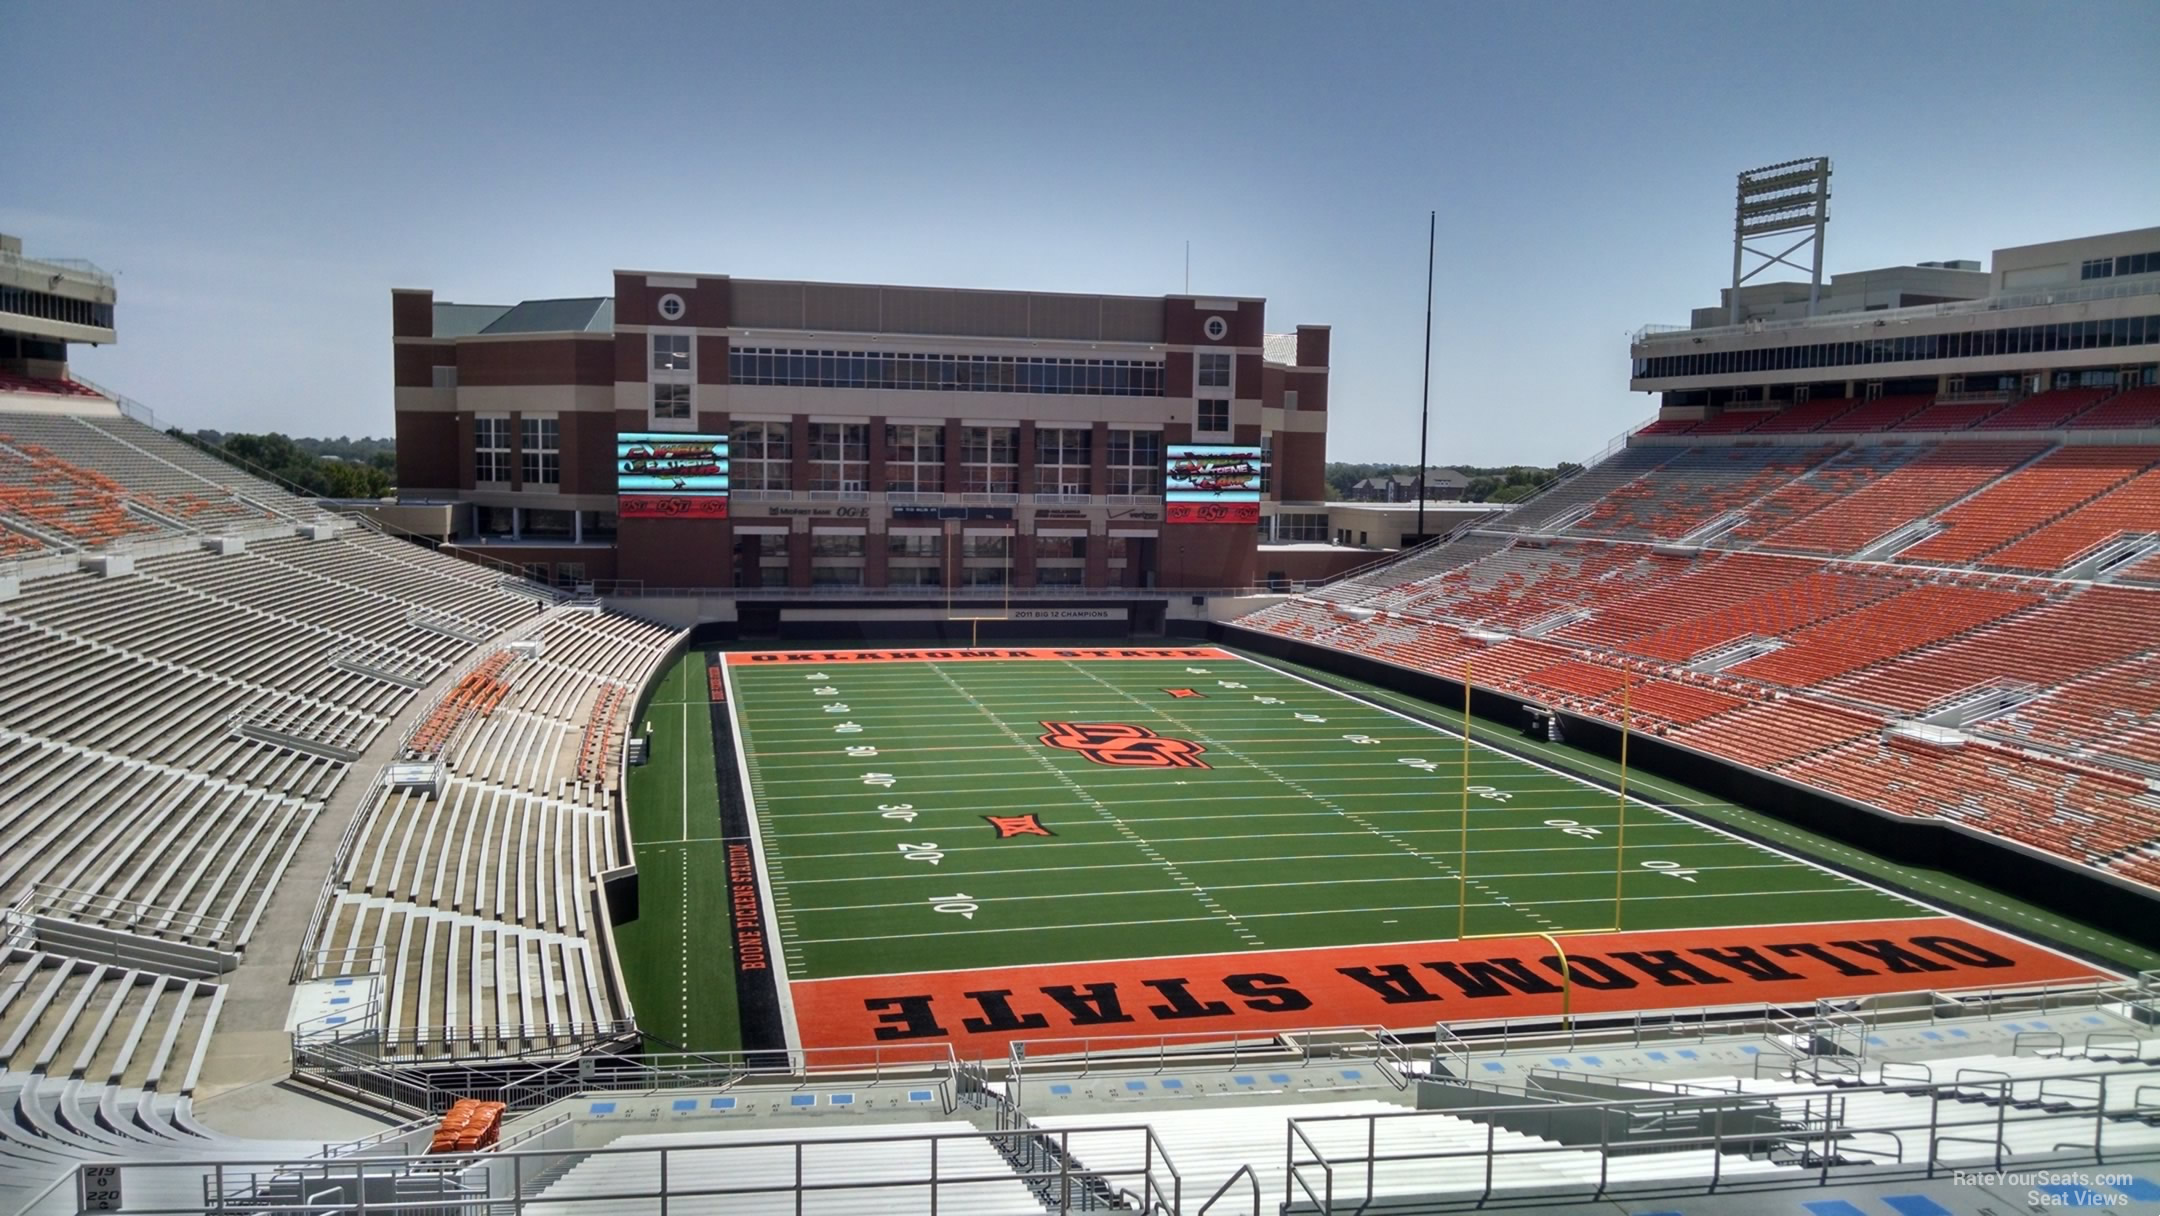 section 322, row 19 seat view  - boone pickens stadium